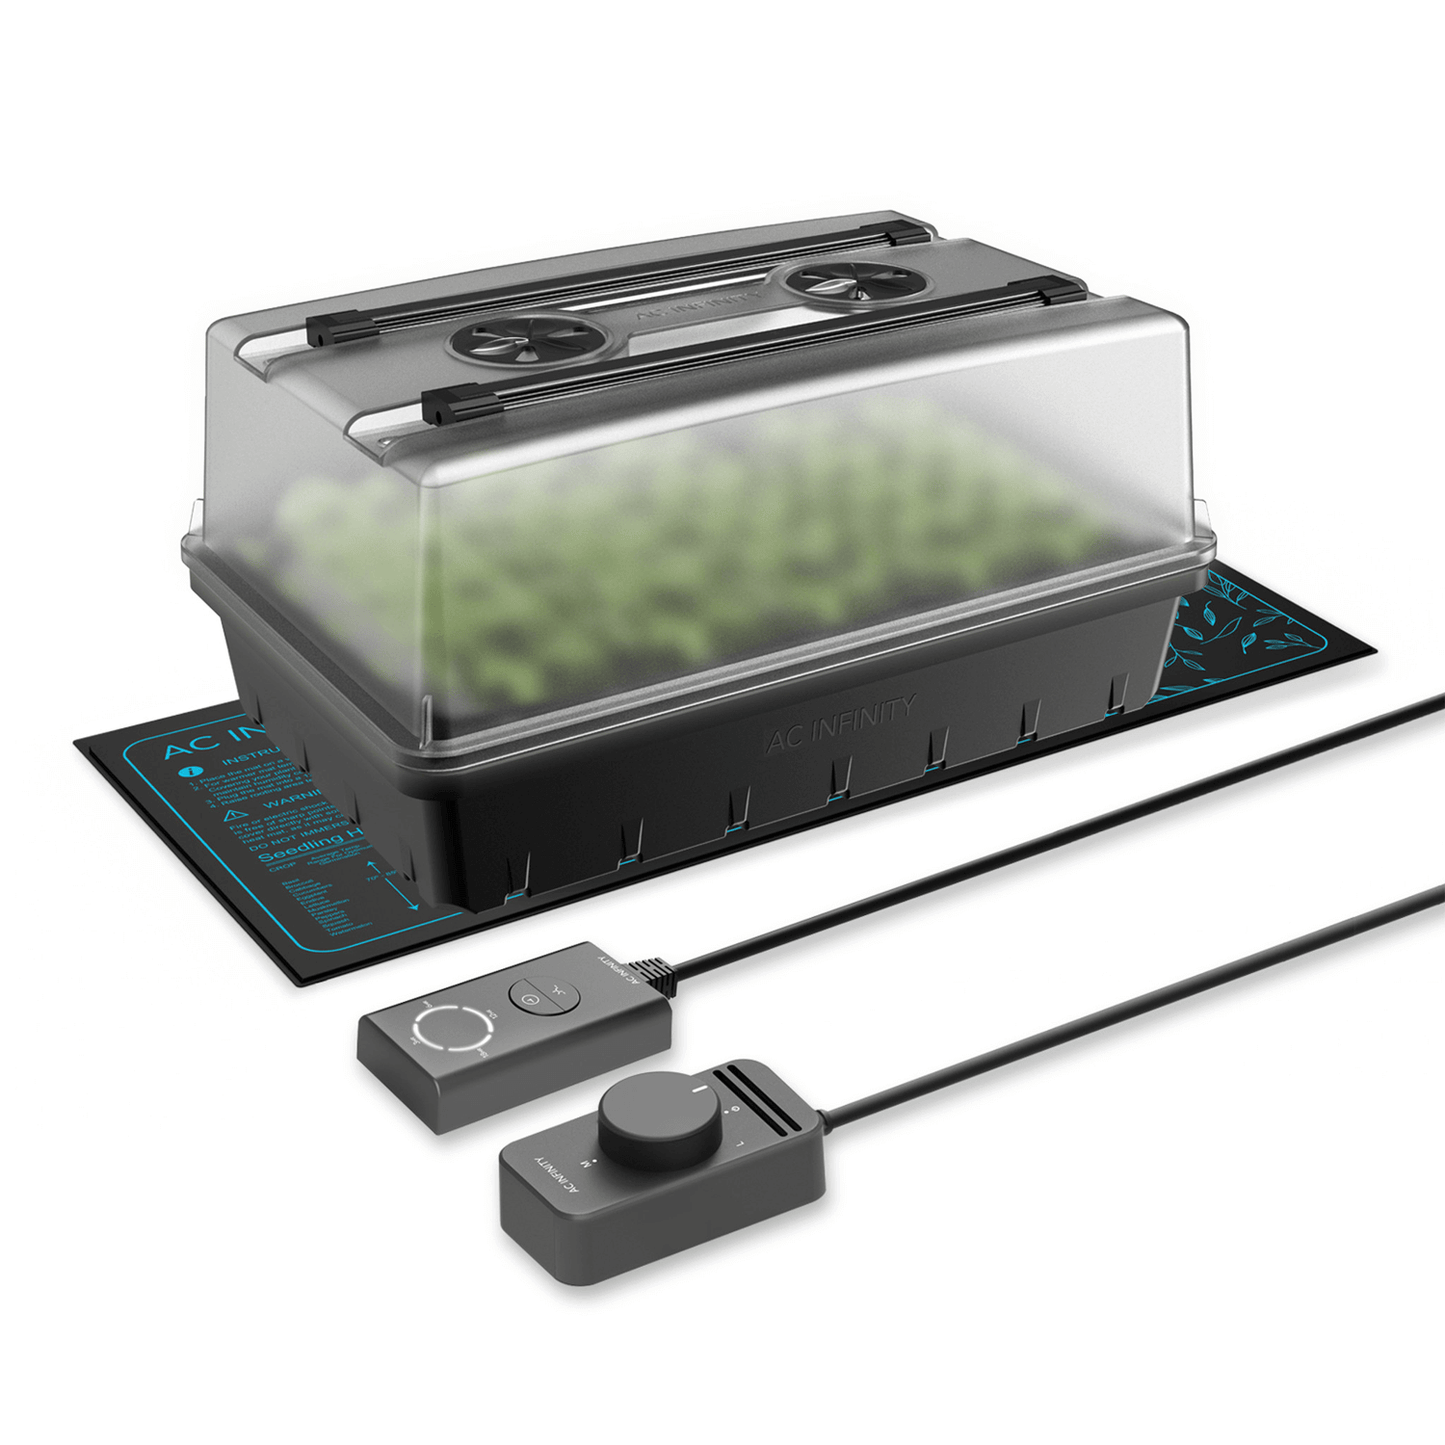 AC Infinity Humidity Dome, Germination Kit with Seedling Mat and LED Grow Light Bars, 5x8 Cell Tray | AC-HMX5 | Grow Tents Depot | Planting & Watering | 819137023413